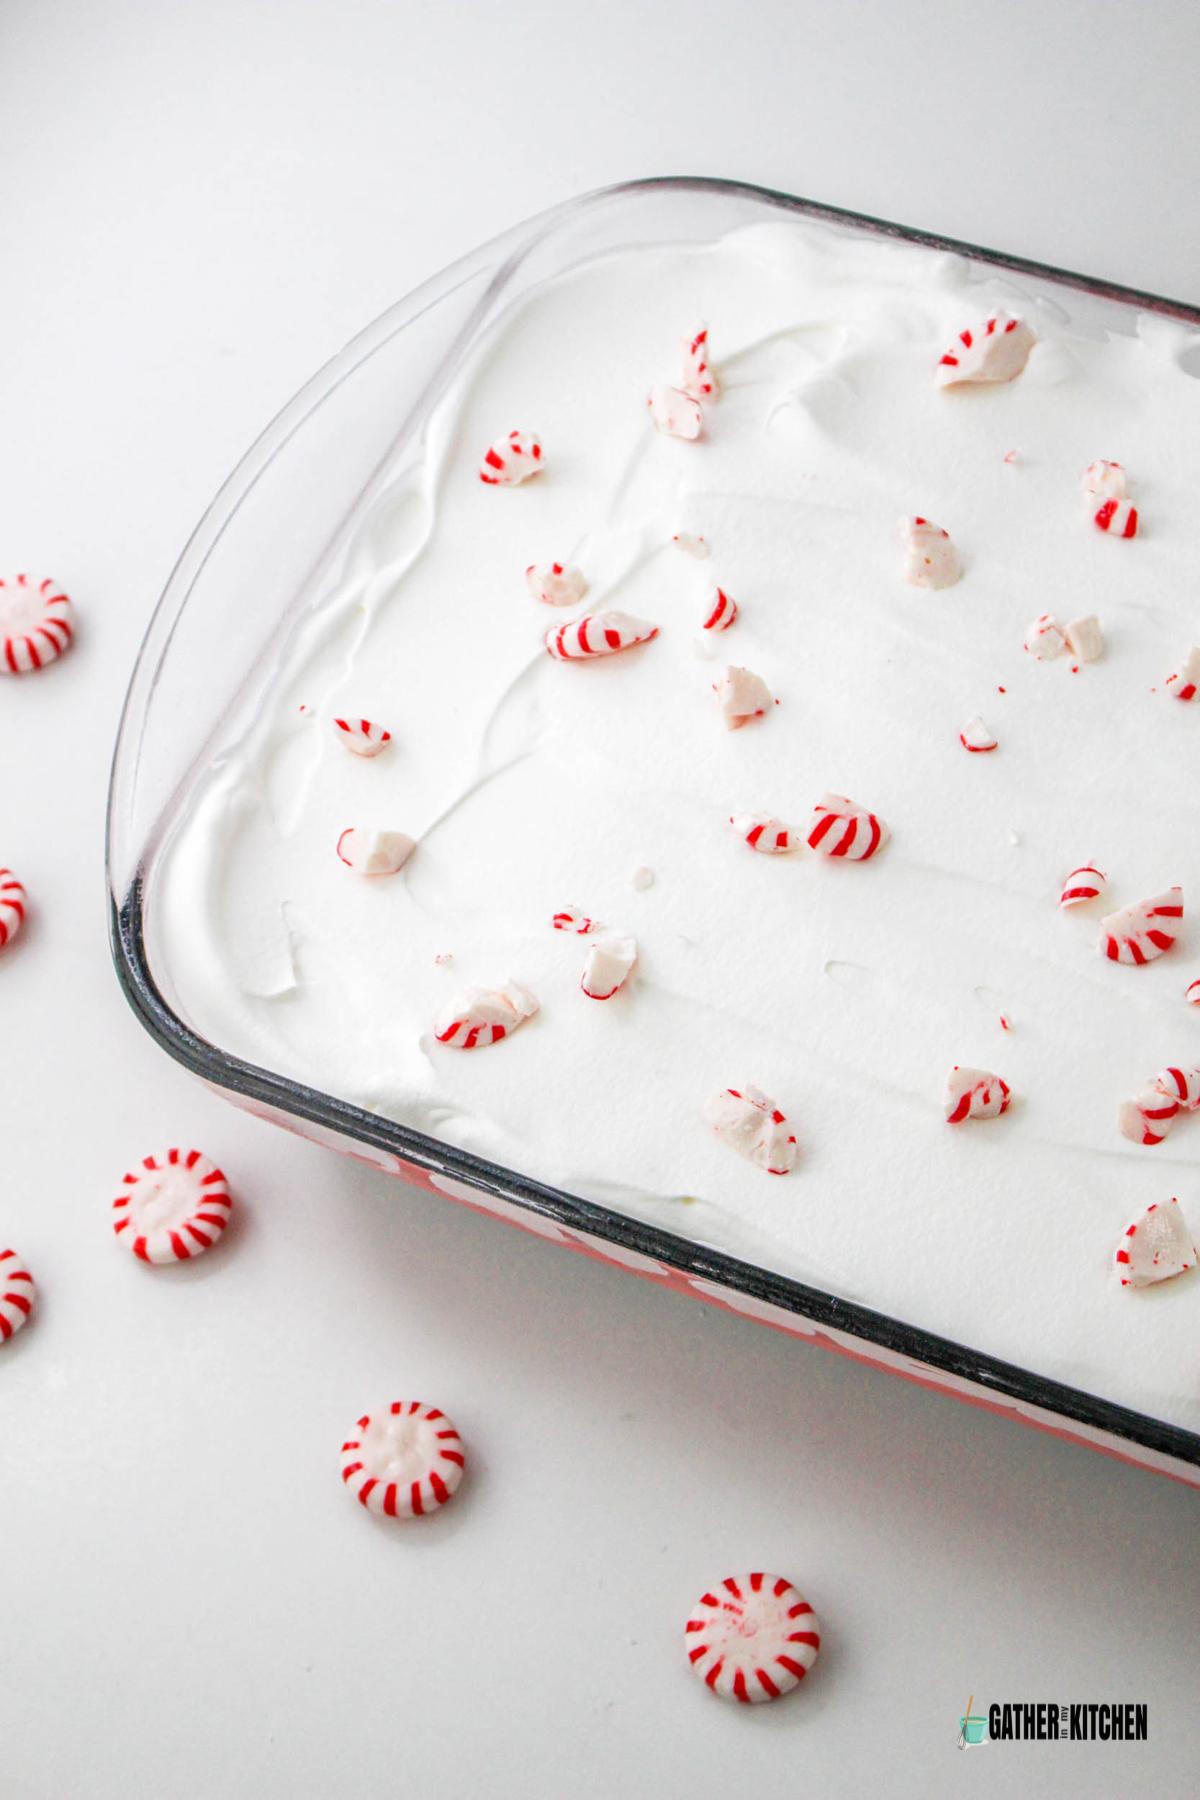 Whipped topping spread over layers in baking dish and topped with pieces of peppermint candy.